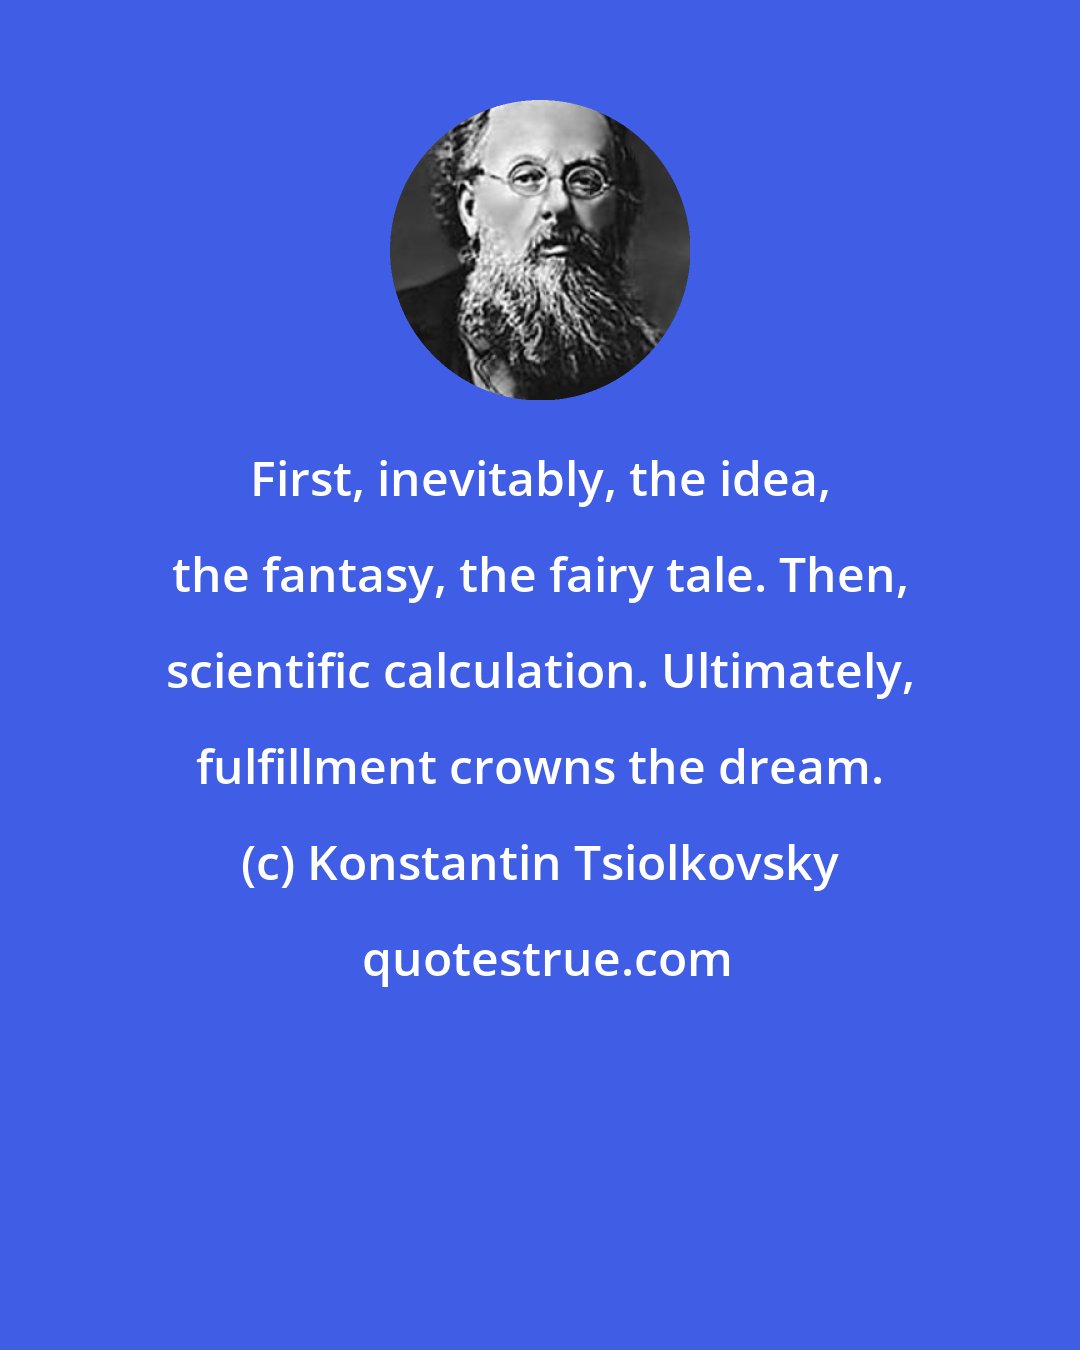 Konstantin Tsiolkovsky: First, inevitably, the idea, the fantasy, the fairy tale. Then, scientific calculation. Ultimately, fulfillment crowns the dream.